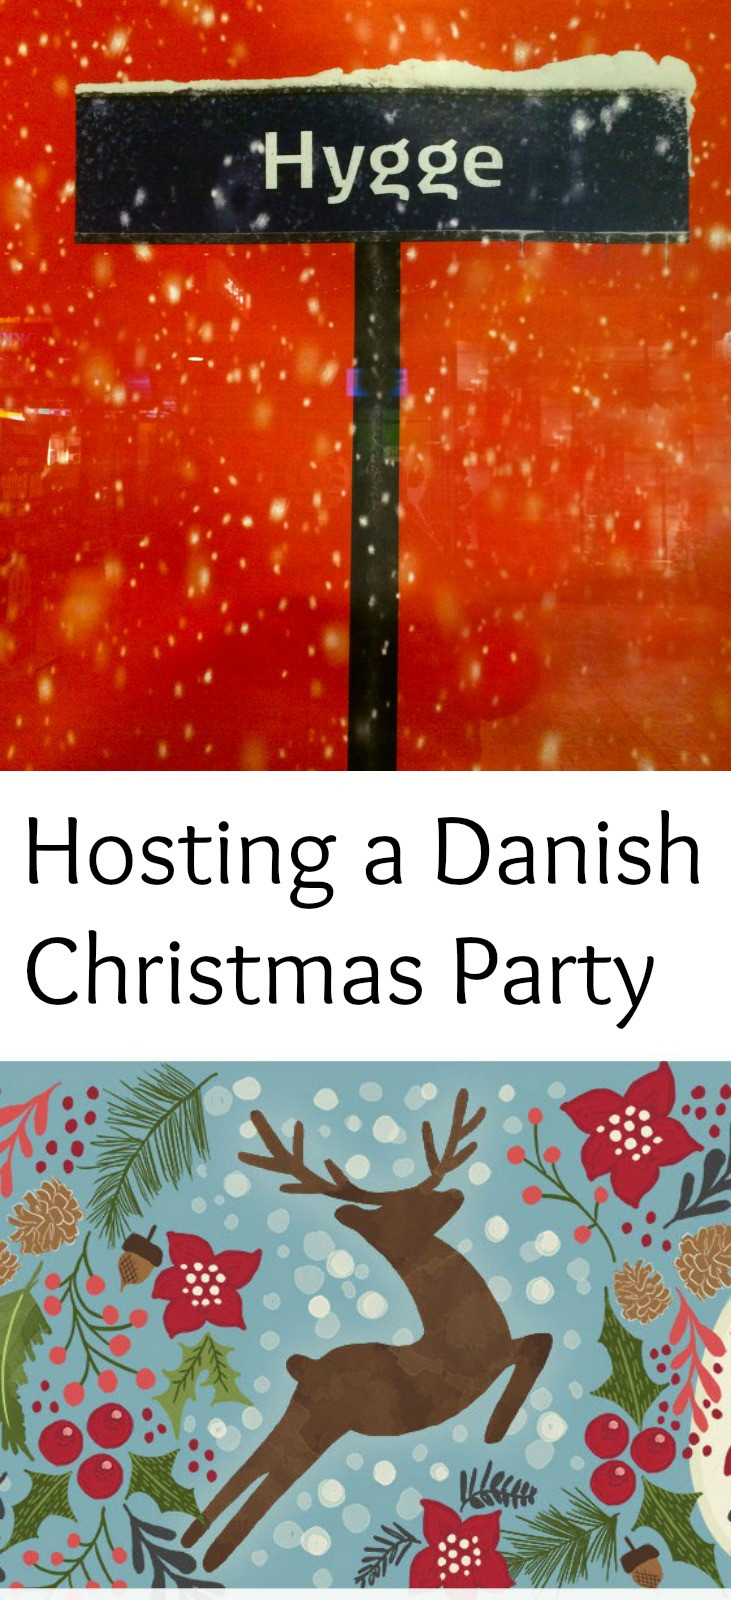 Hosting Christmas Party Ideas
 Hosting a Danish Christmas Party LifesBetterTo her